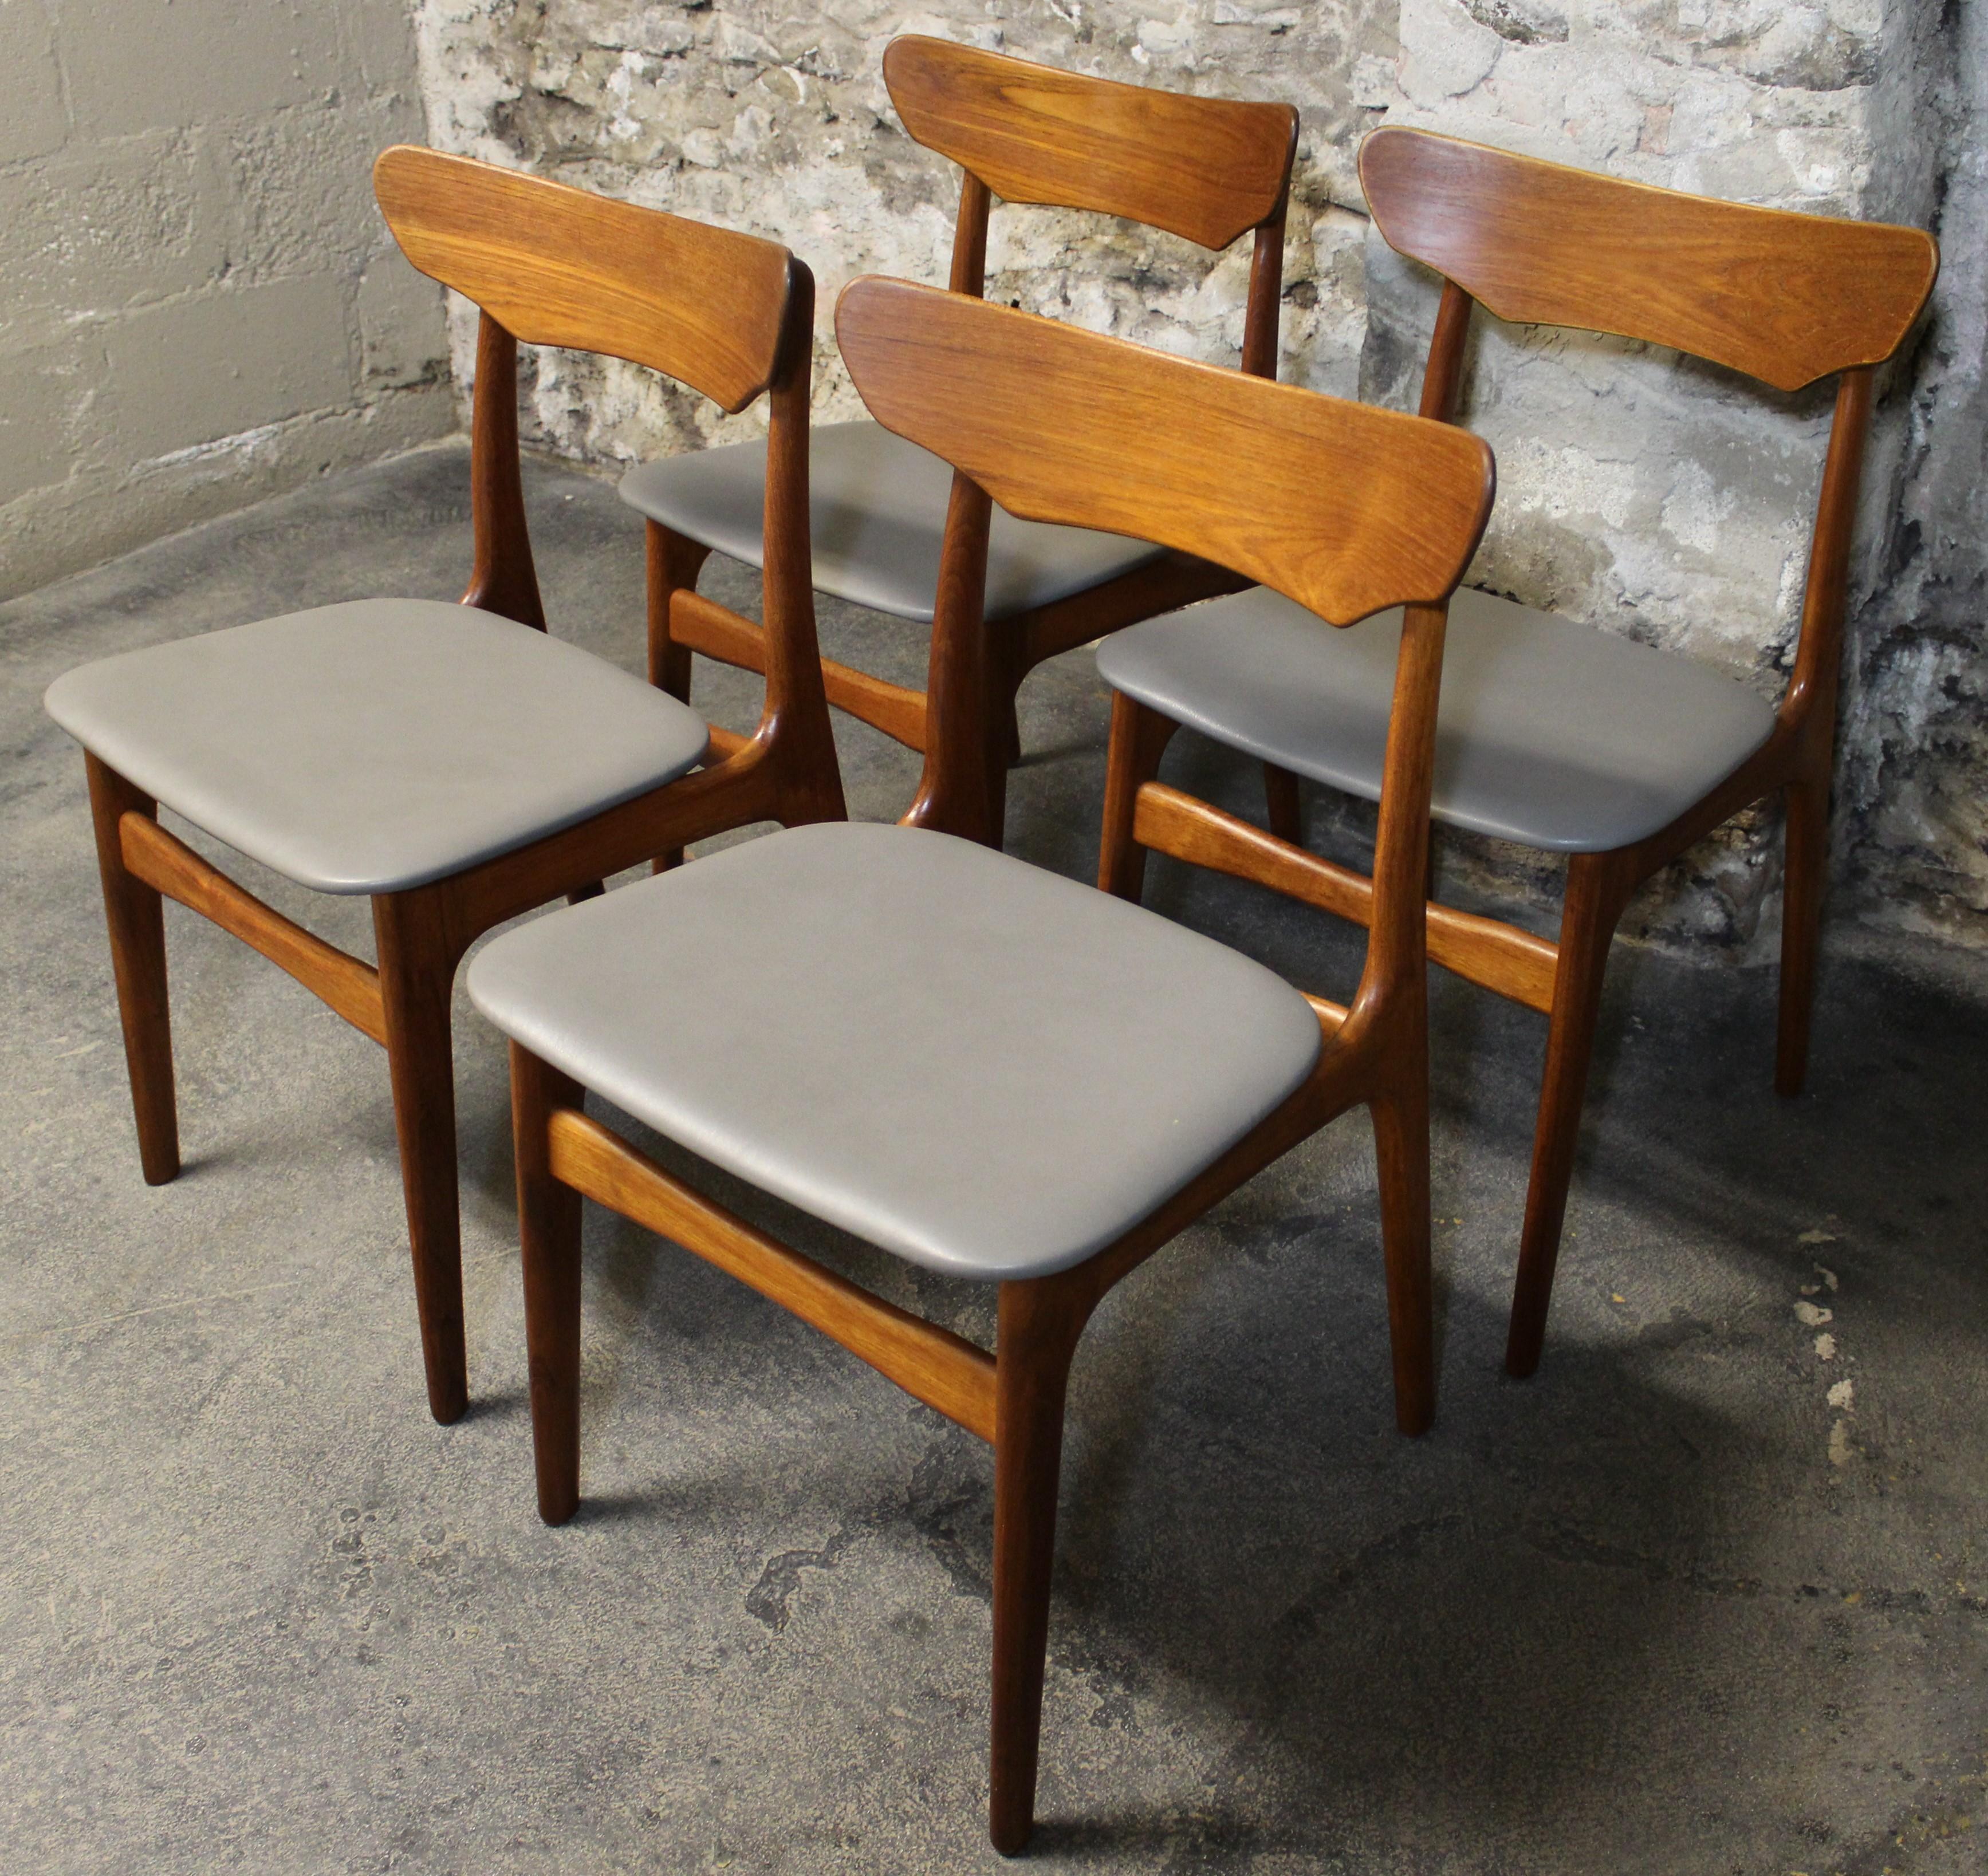 Four Danish Teak Dining Chairs by Schionning and Elgaard for Randers 2